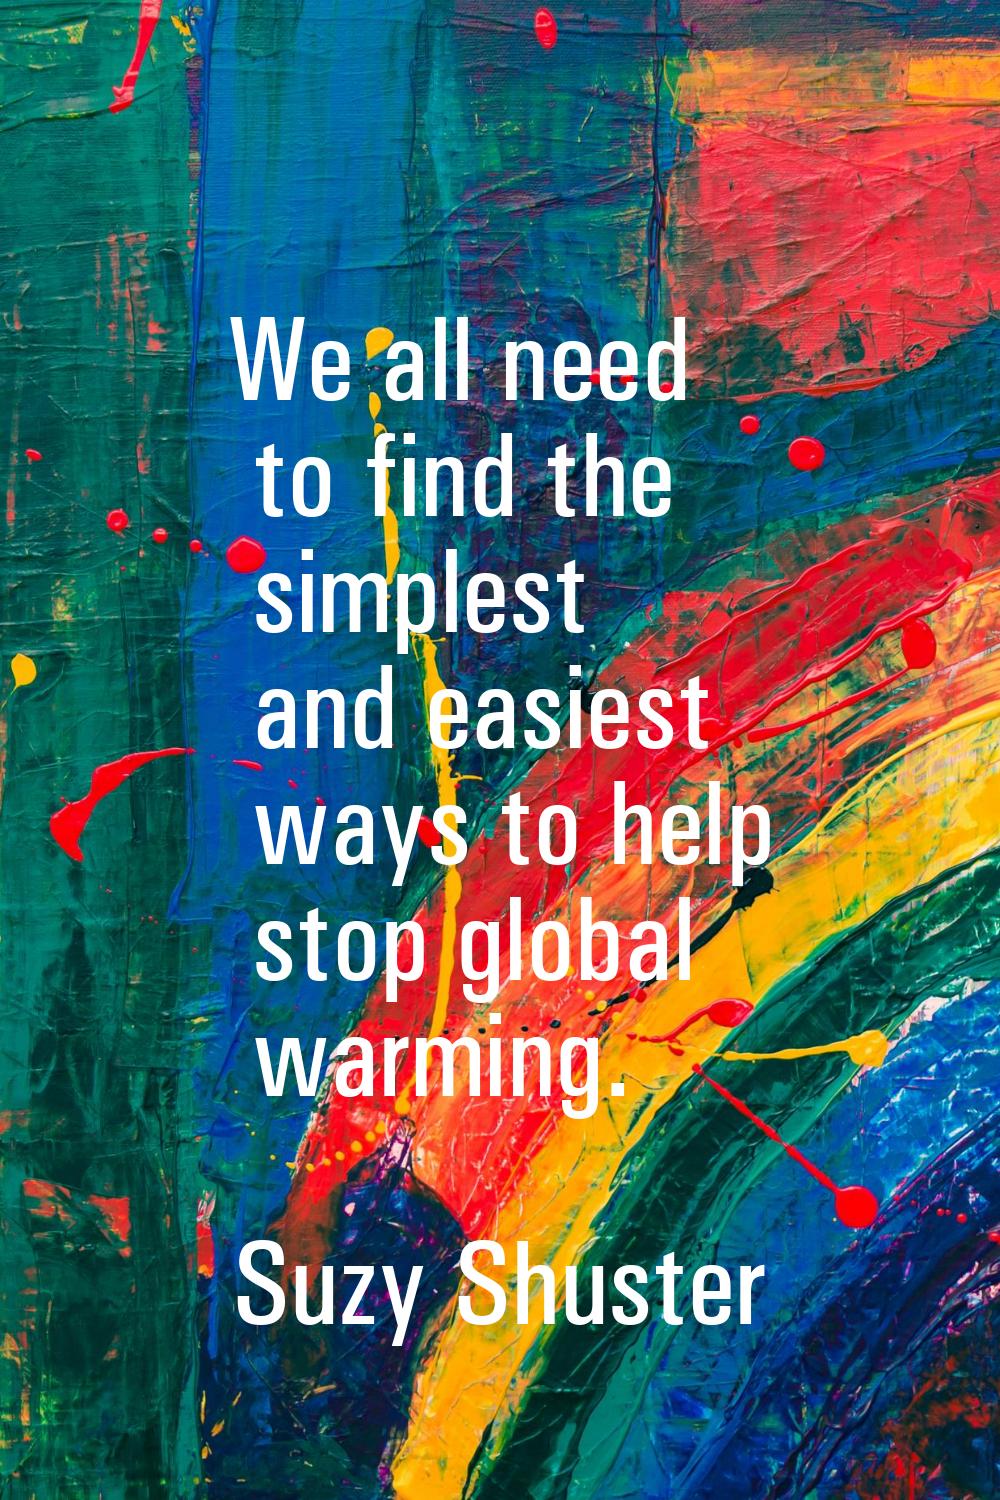 We all need to find the simplest and easiest ways to help stop global warming.